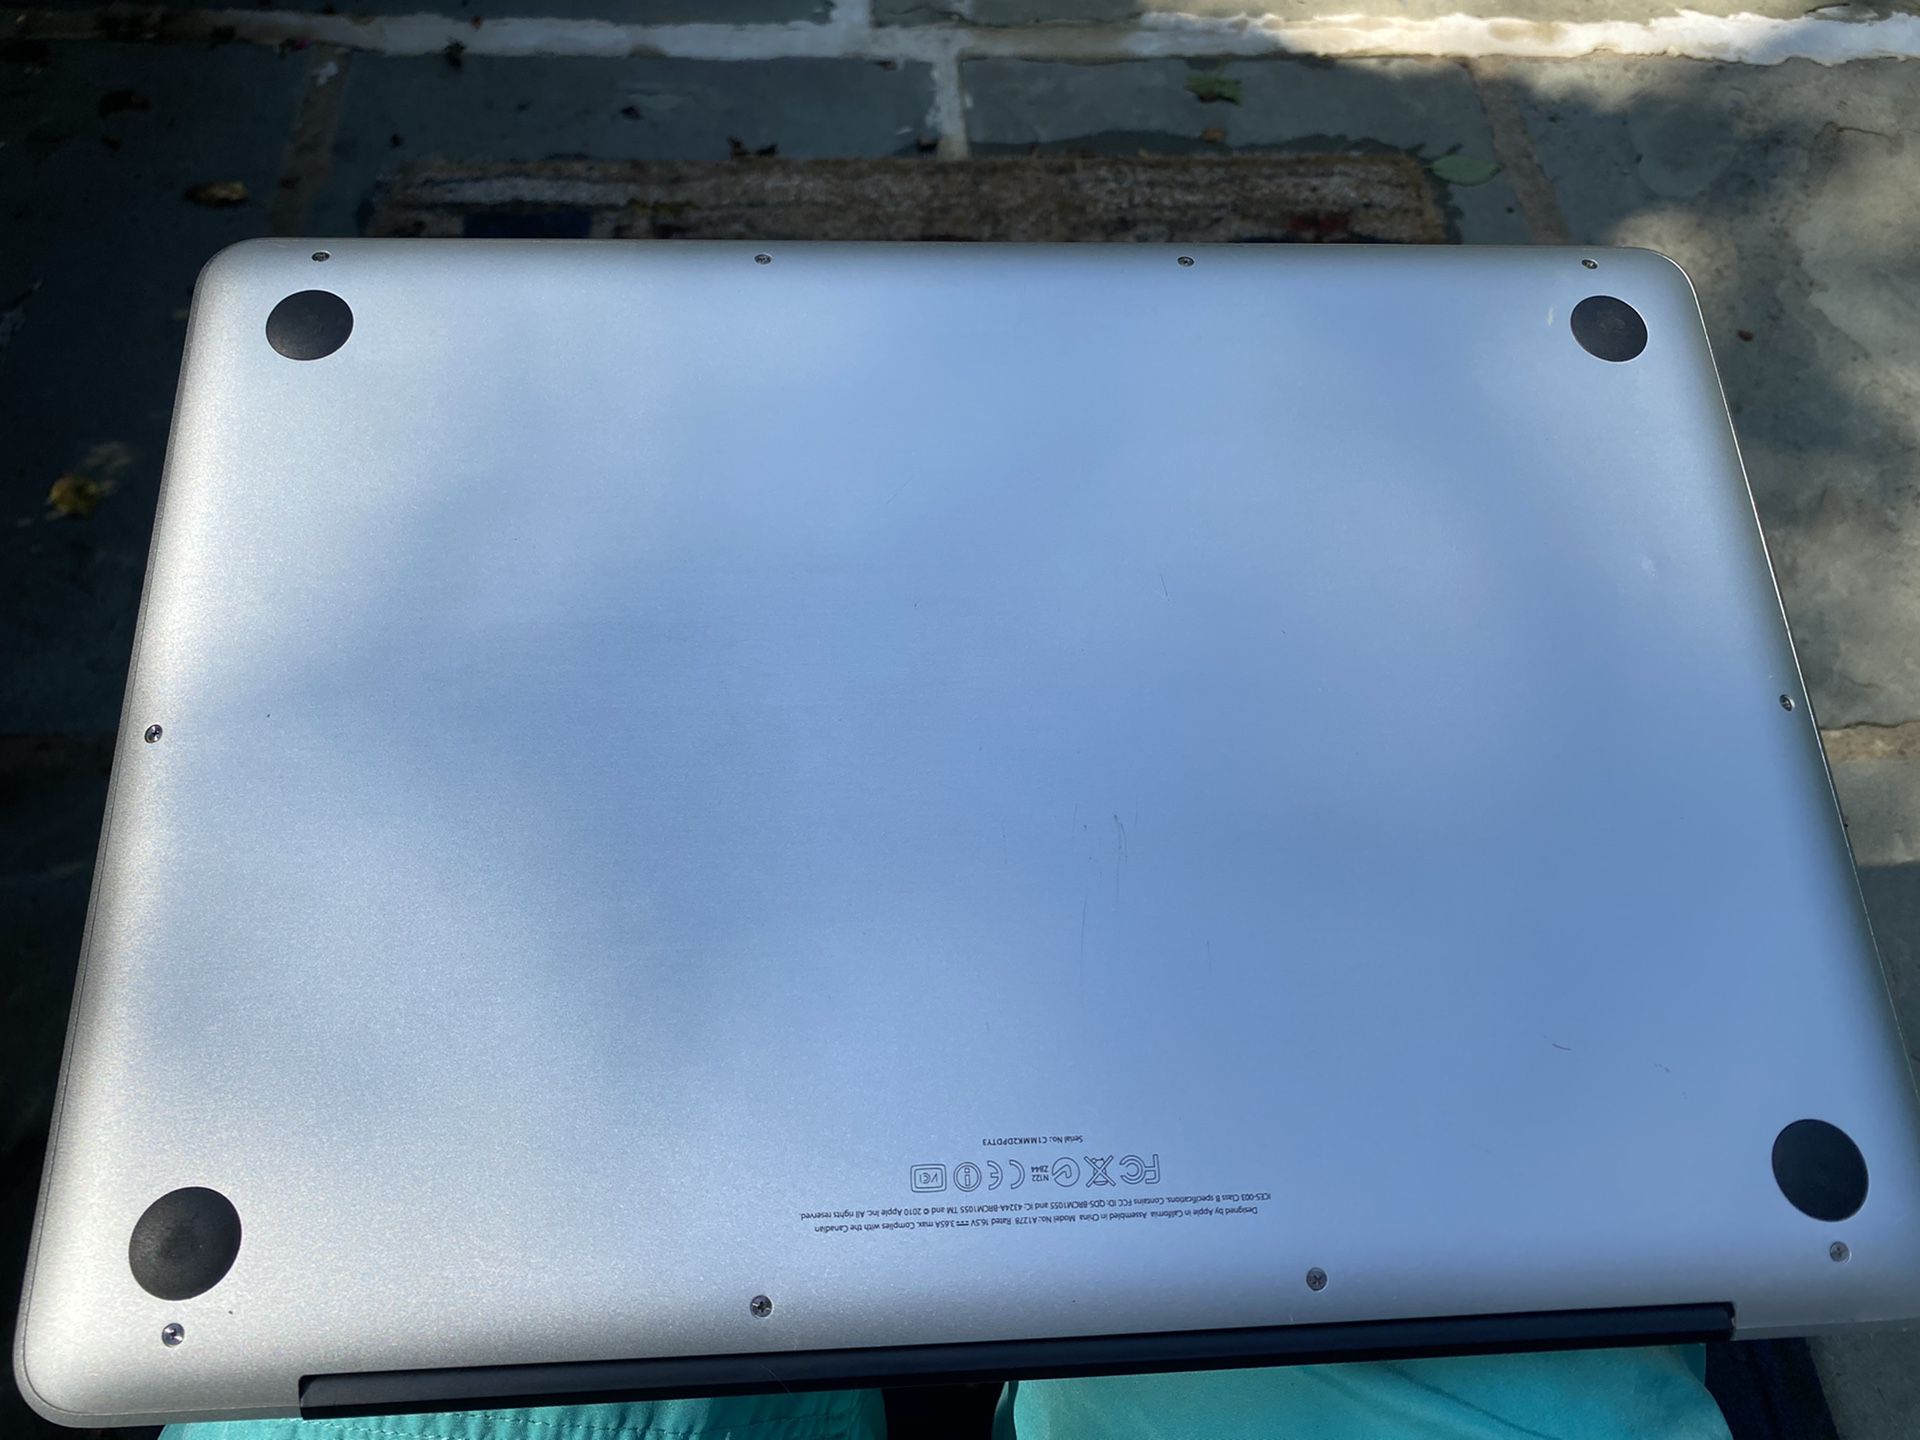 13” MacBook Pro with 2.5 i5 4gb and 500gb